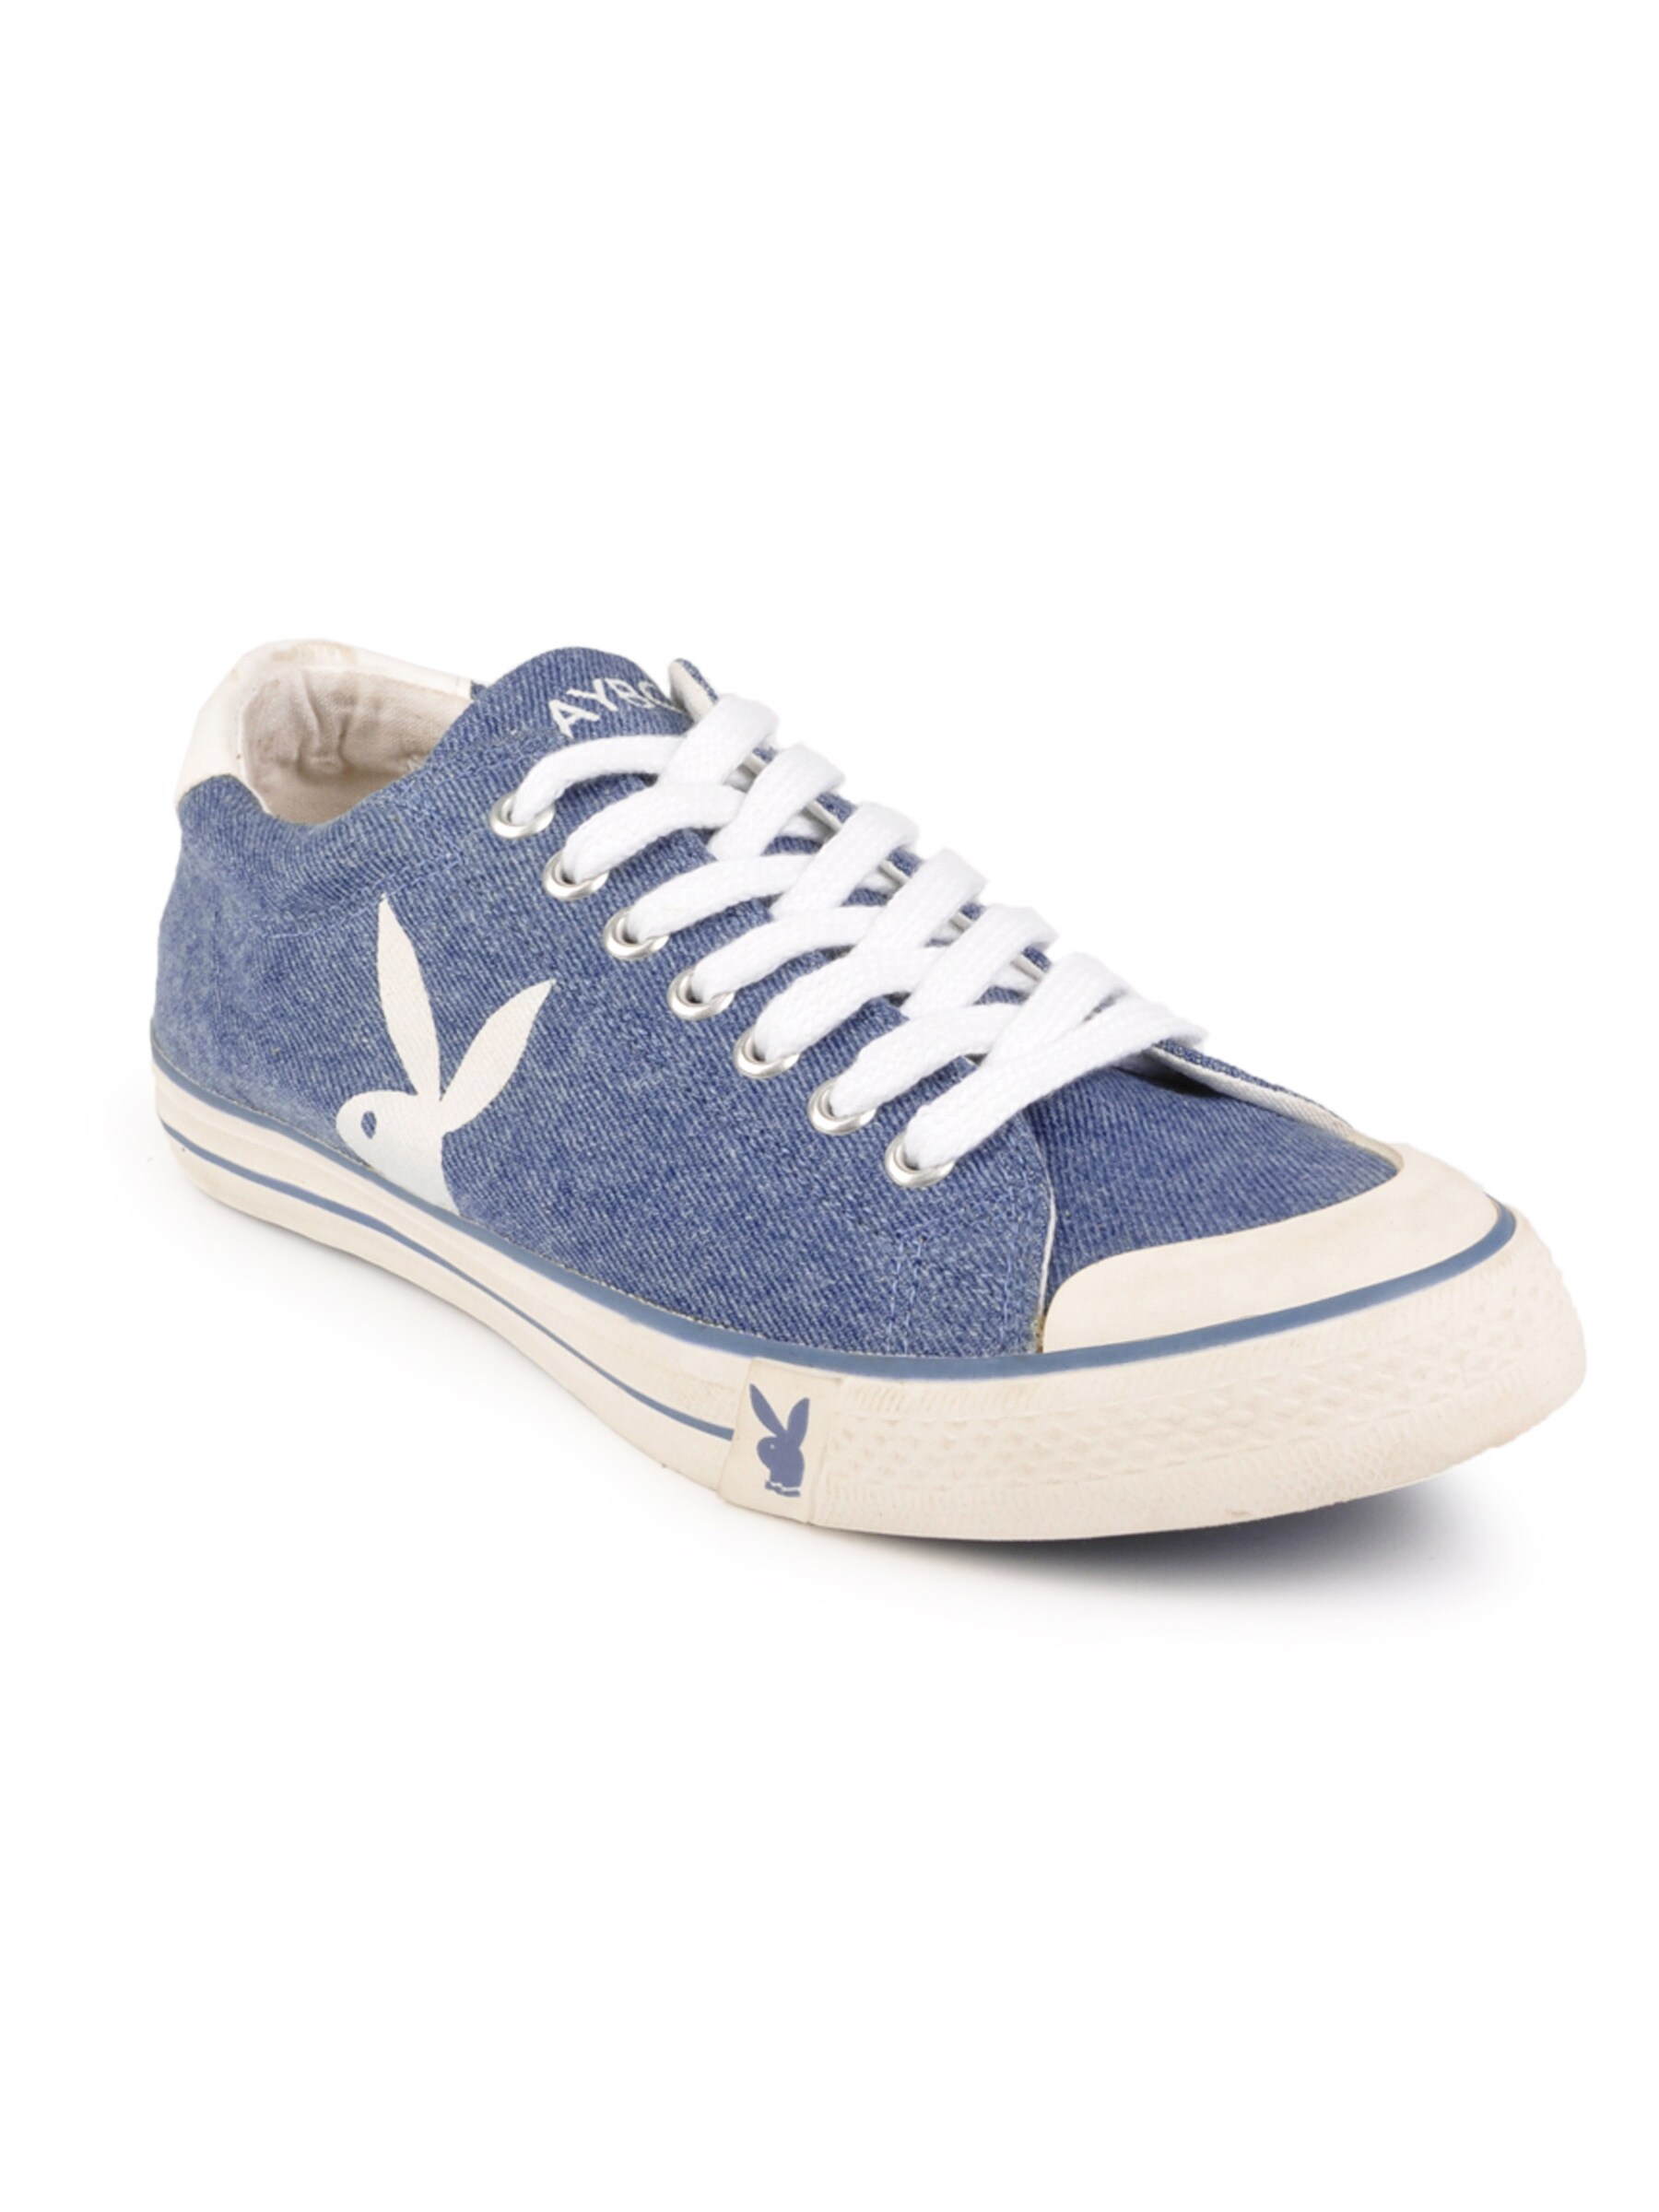 Playboy Men Casual Blue Casual Shoes